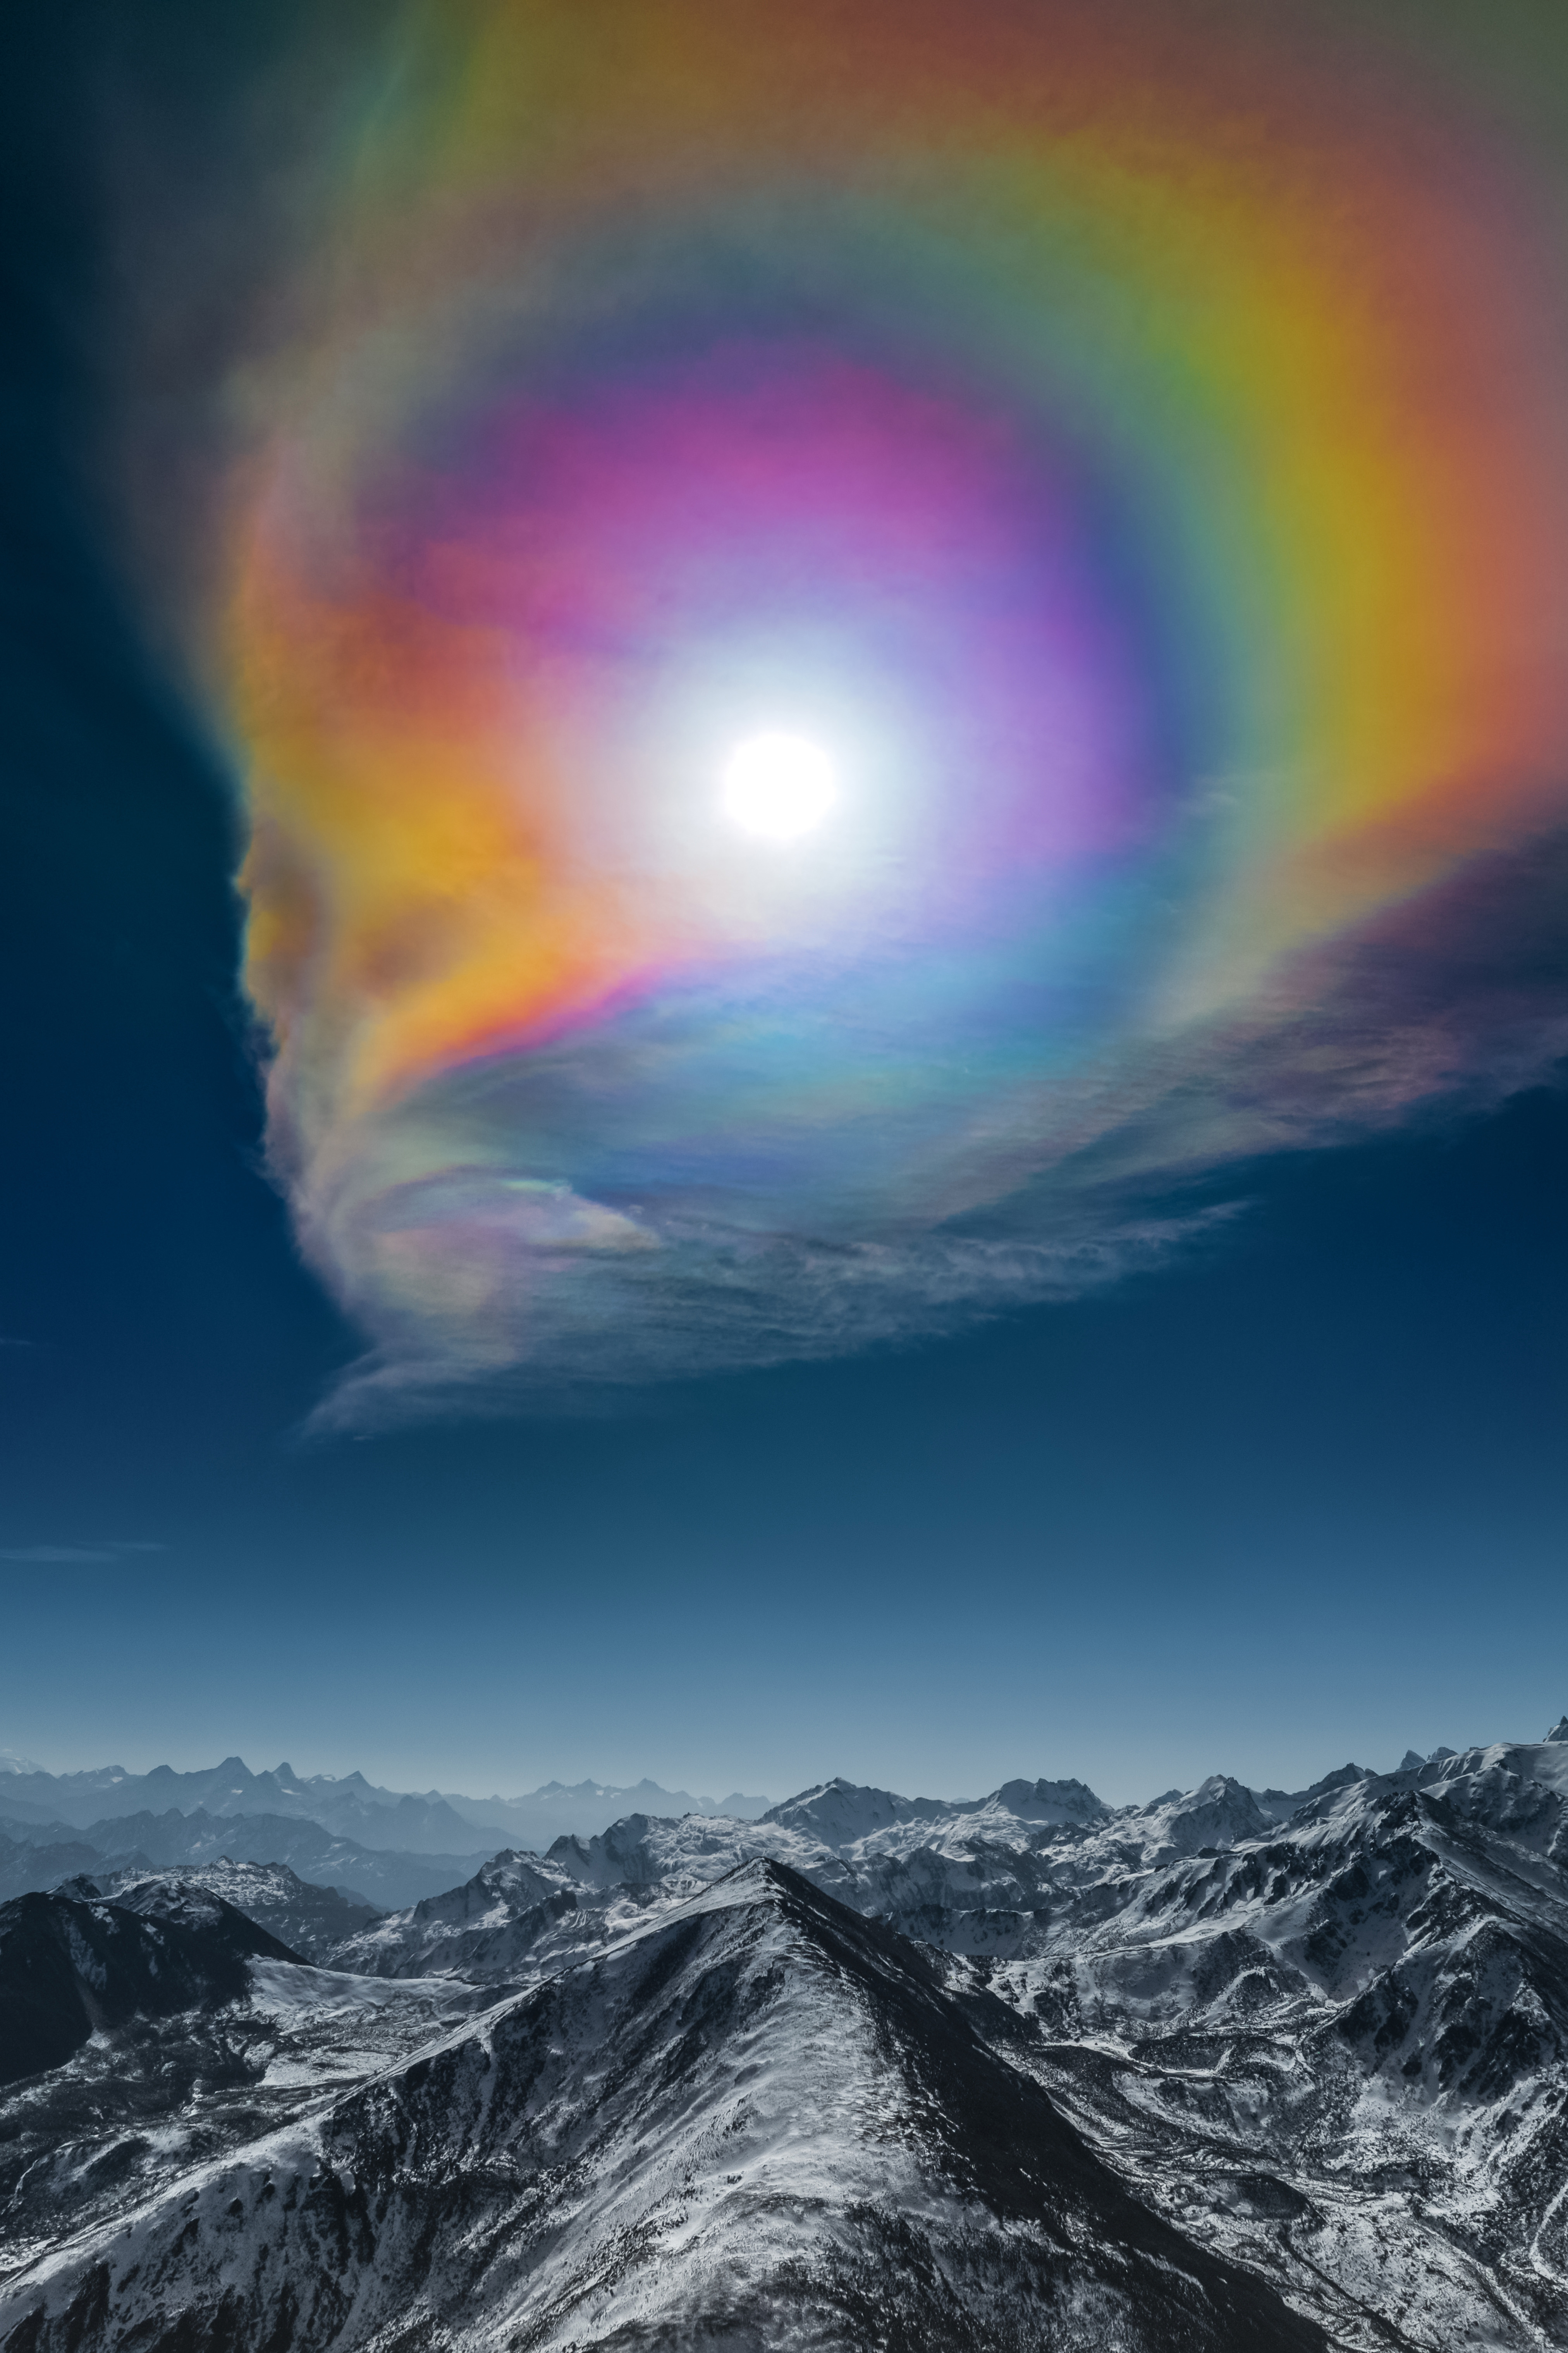 A colorful circular structure is seen withing the clouds surronding the sun. Below the snowy peaks of the himalayas